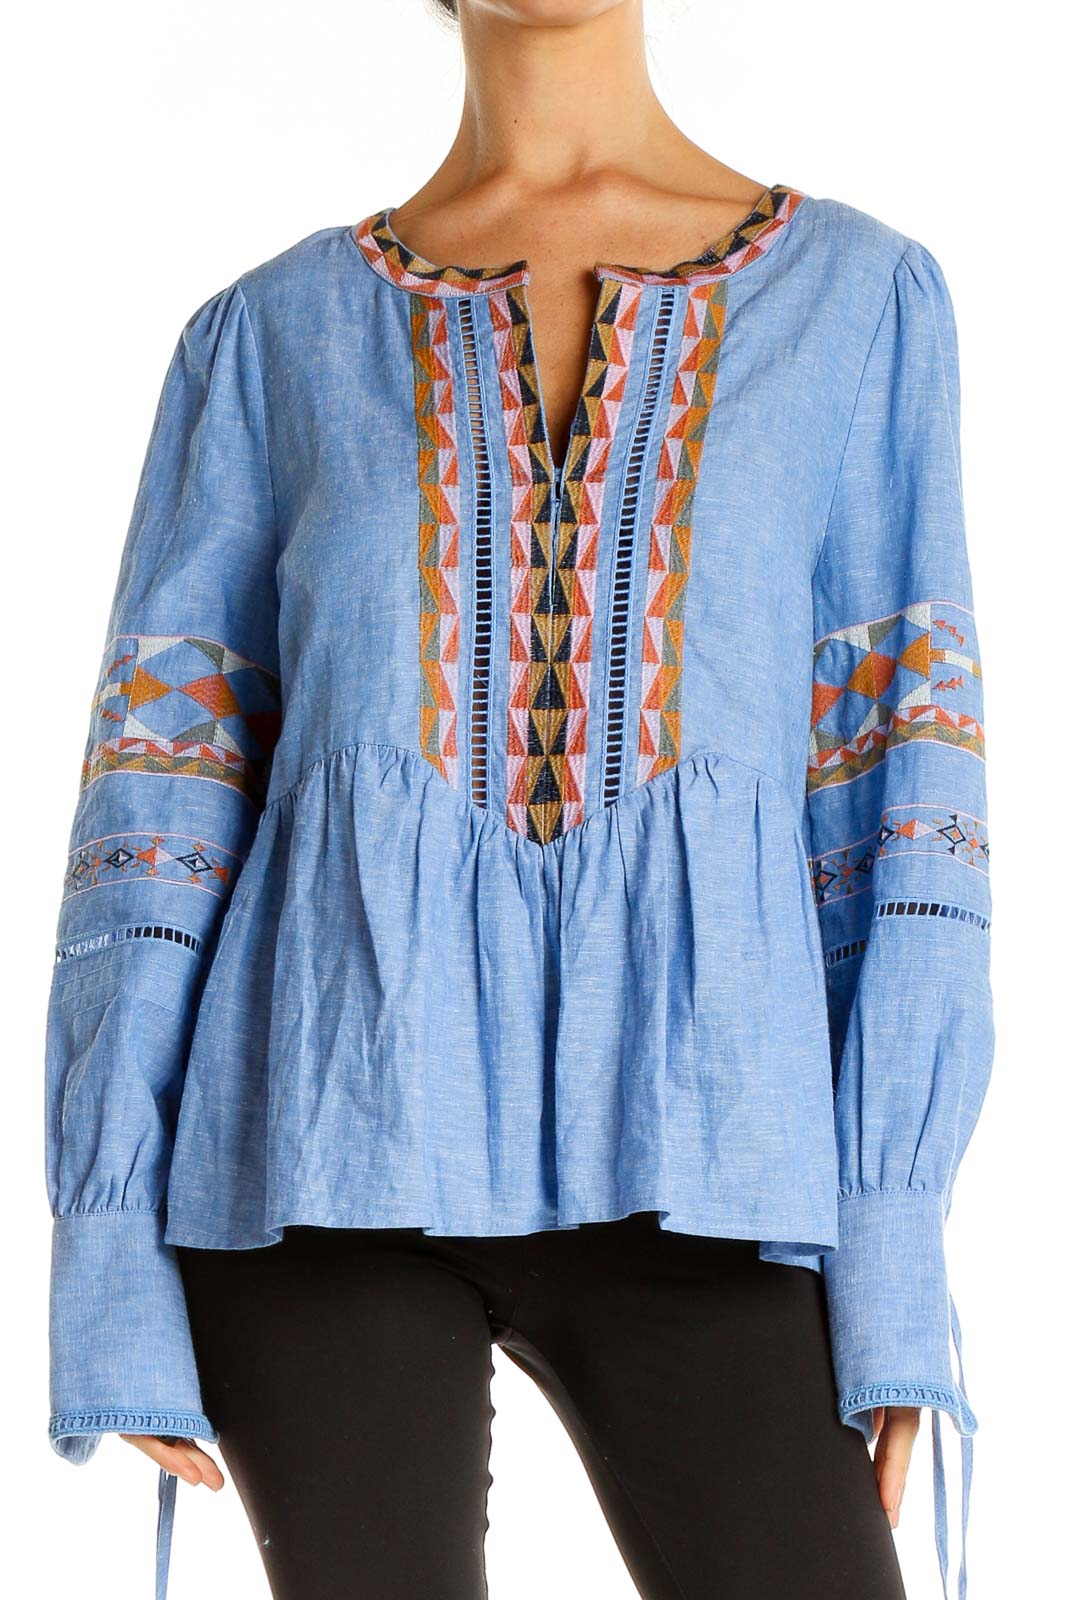 Blue Embroidered Bohemian Top Front